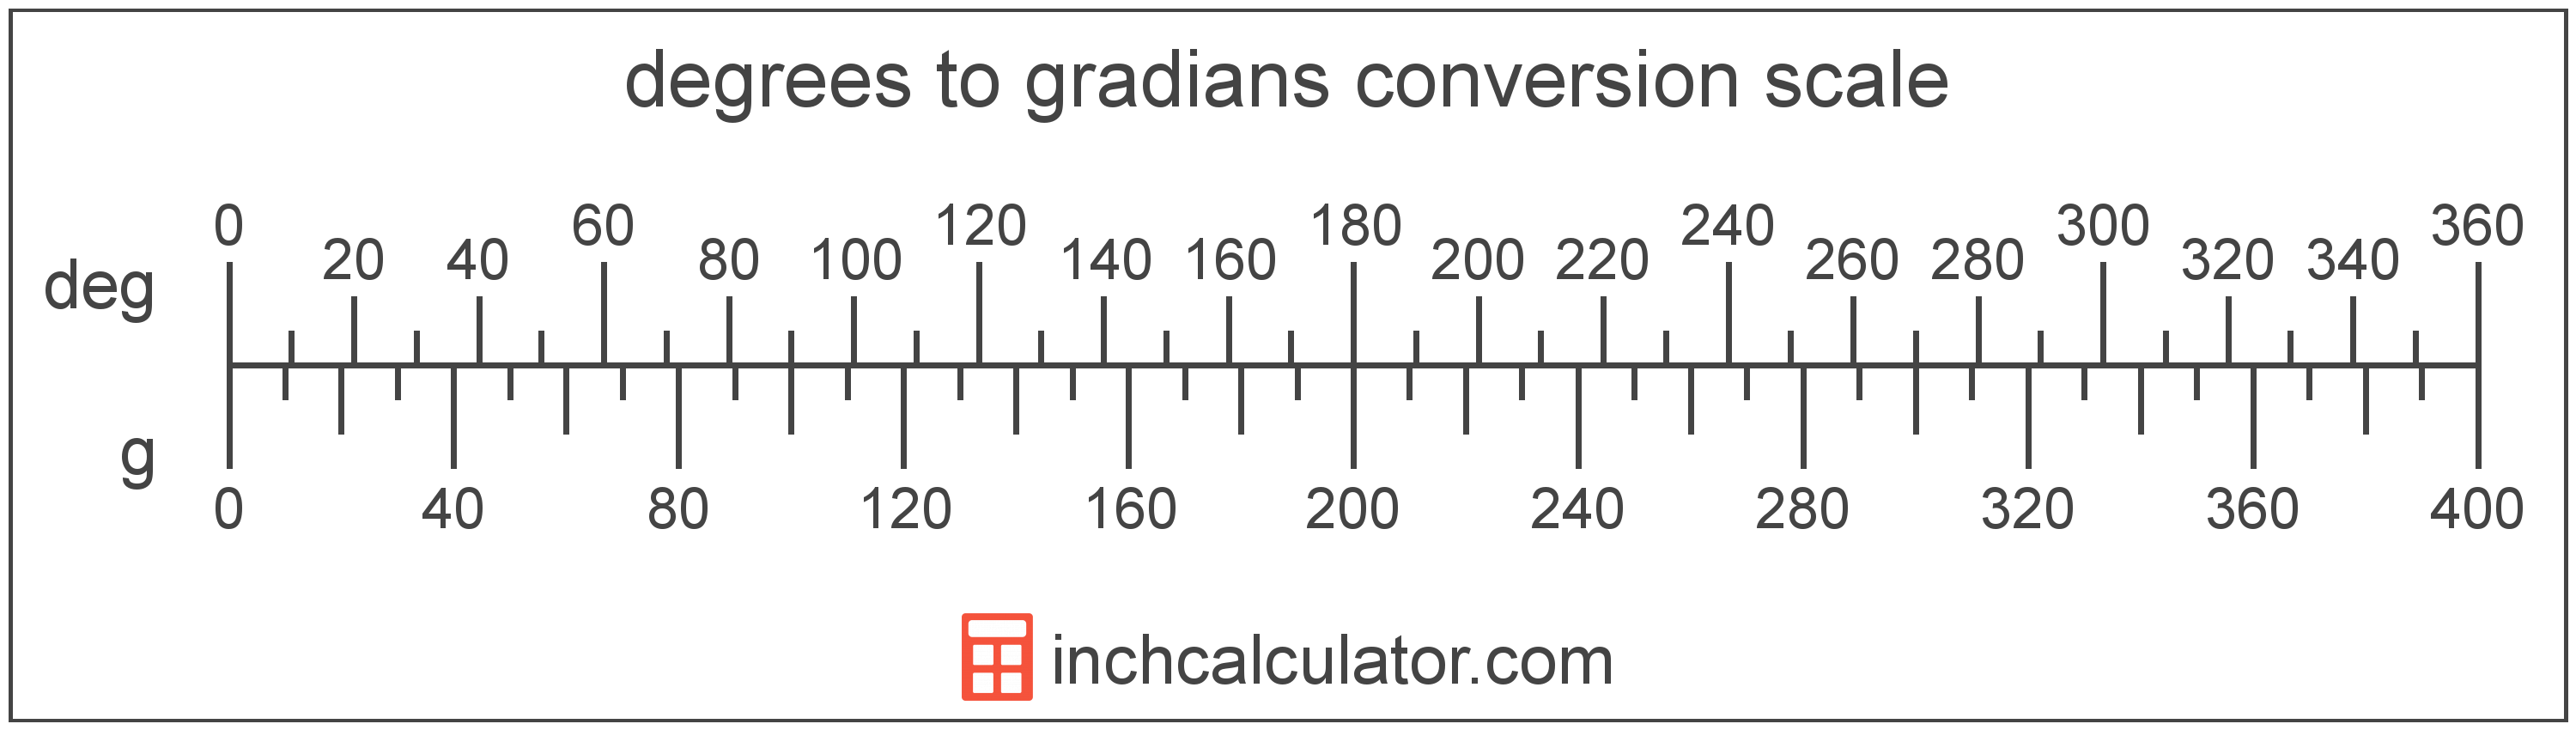 conversion scale showing gradians and equivalent degrees angle values